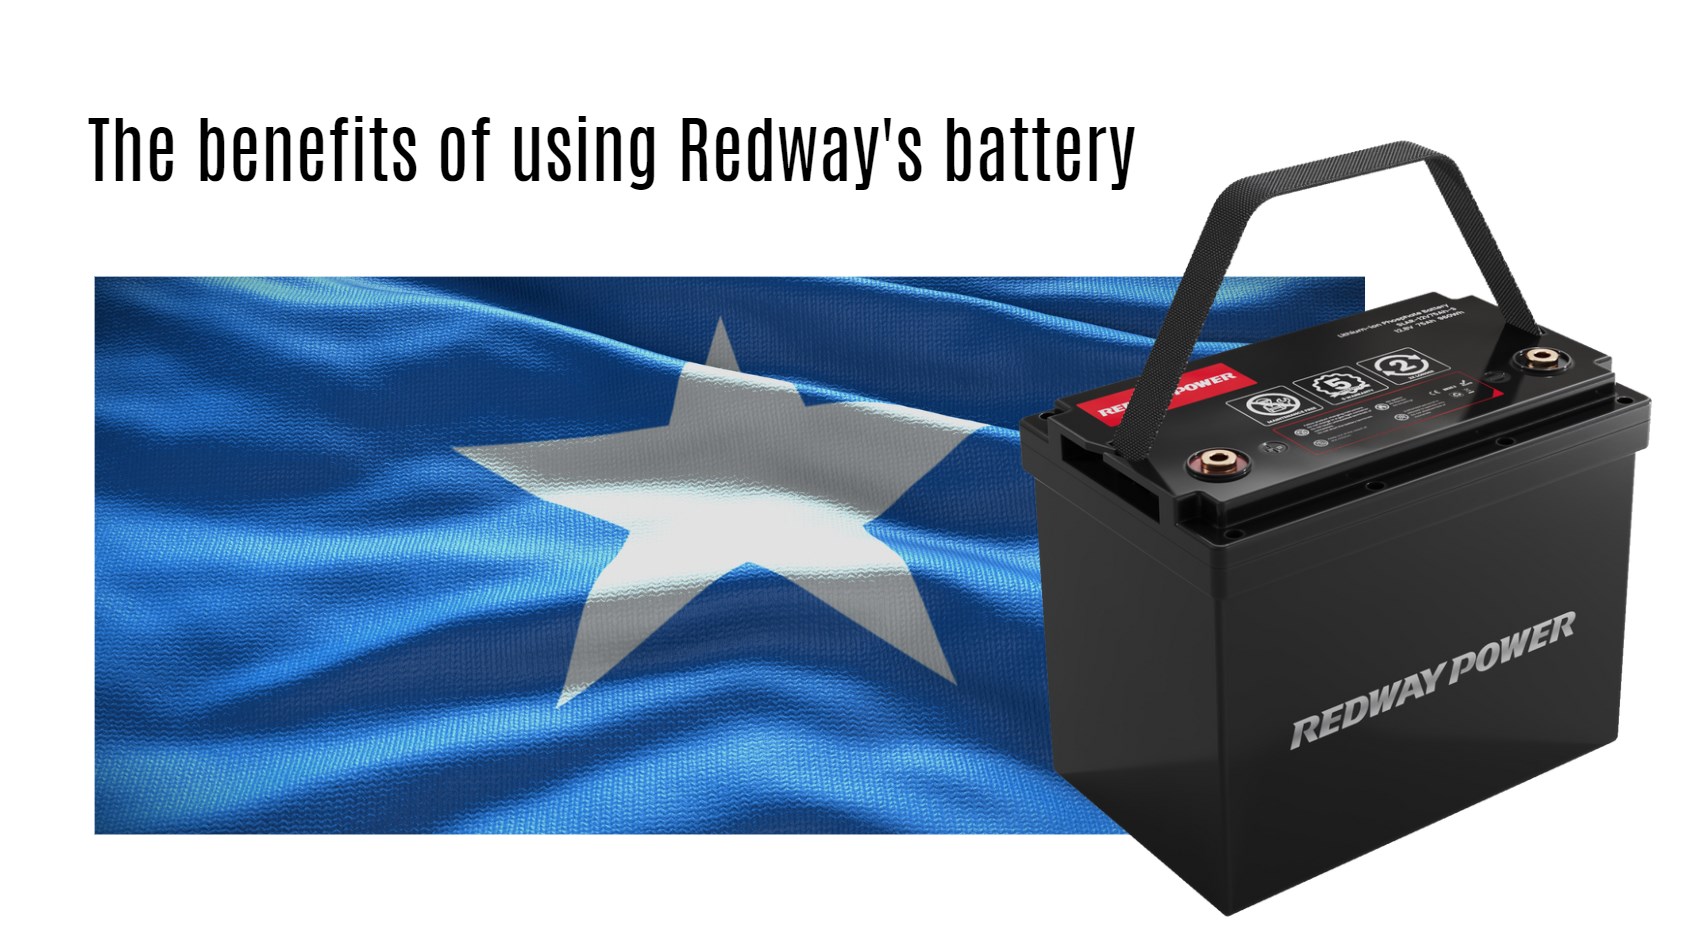 The benefits of using Redway's battery